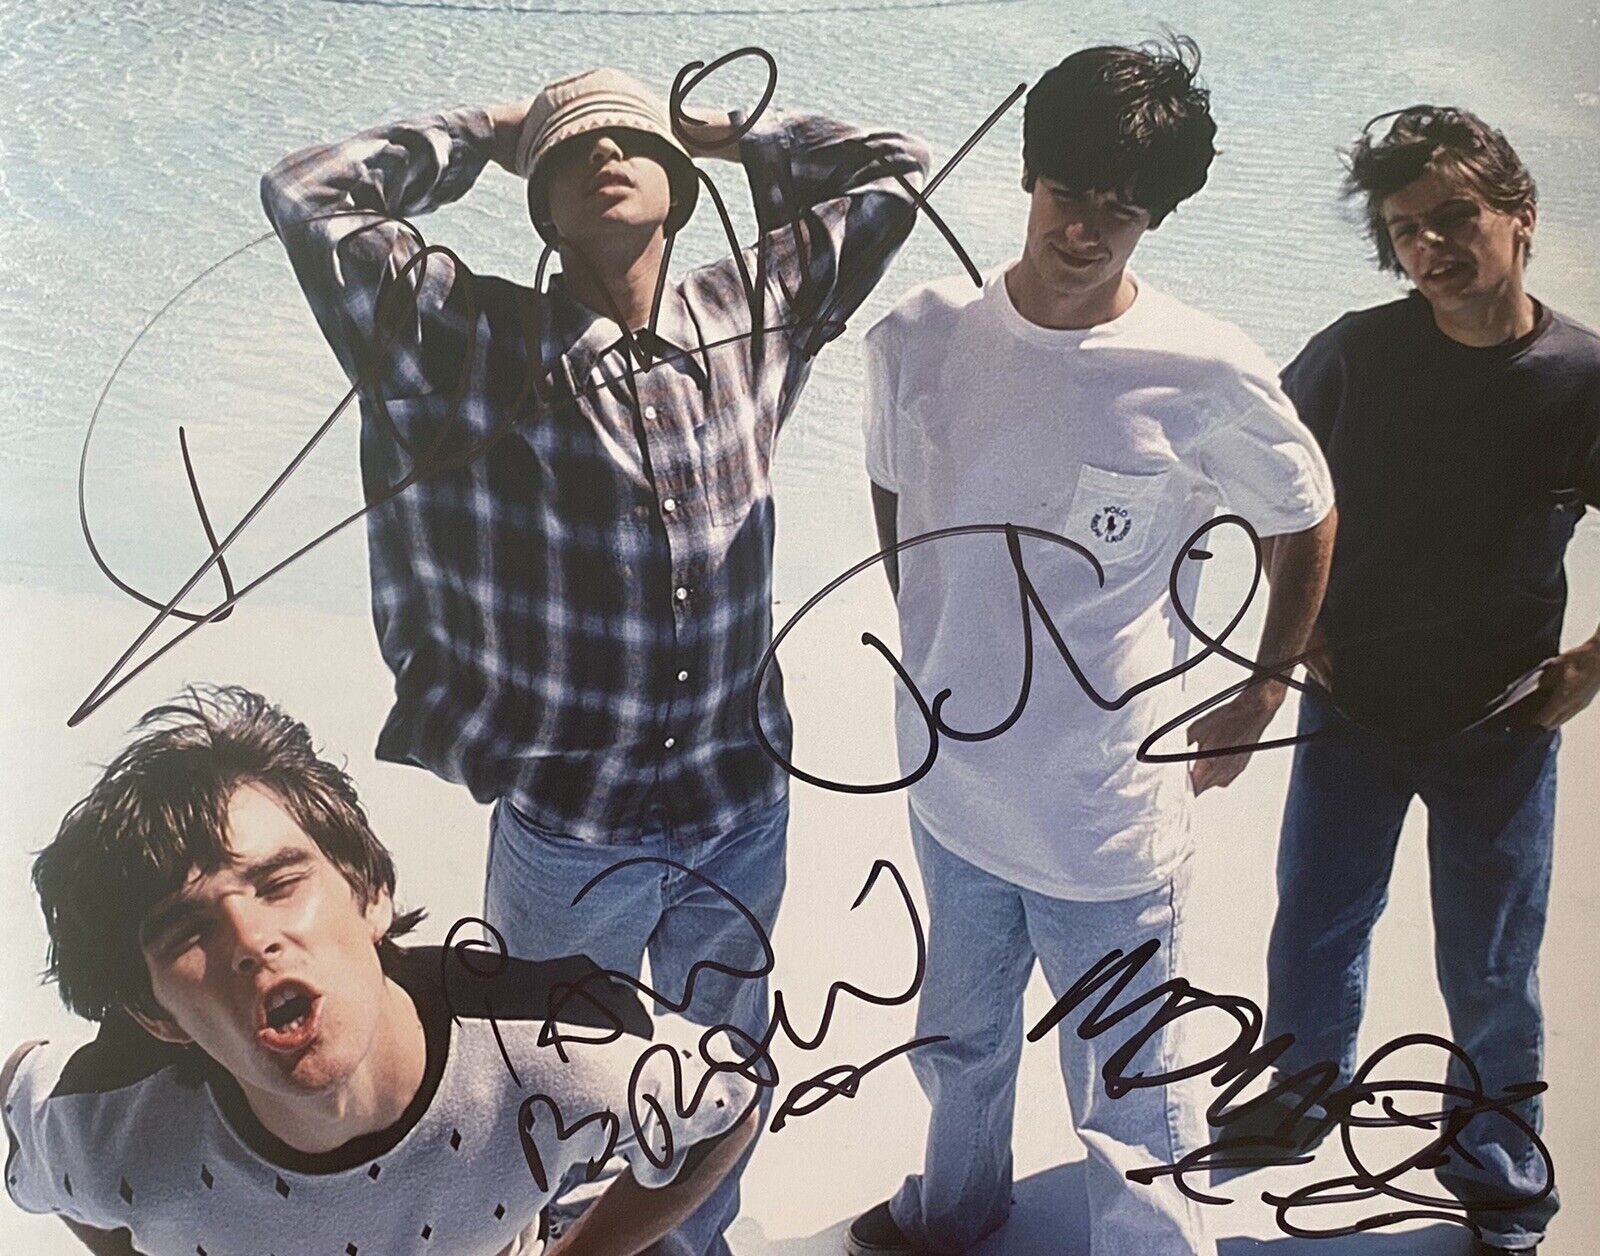 The Stone Roses Genuine Hand Signed 10x8 Photo Poster painting - Mani - Brown - Squire - Reni